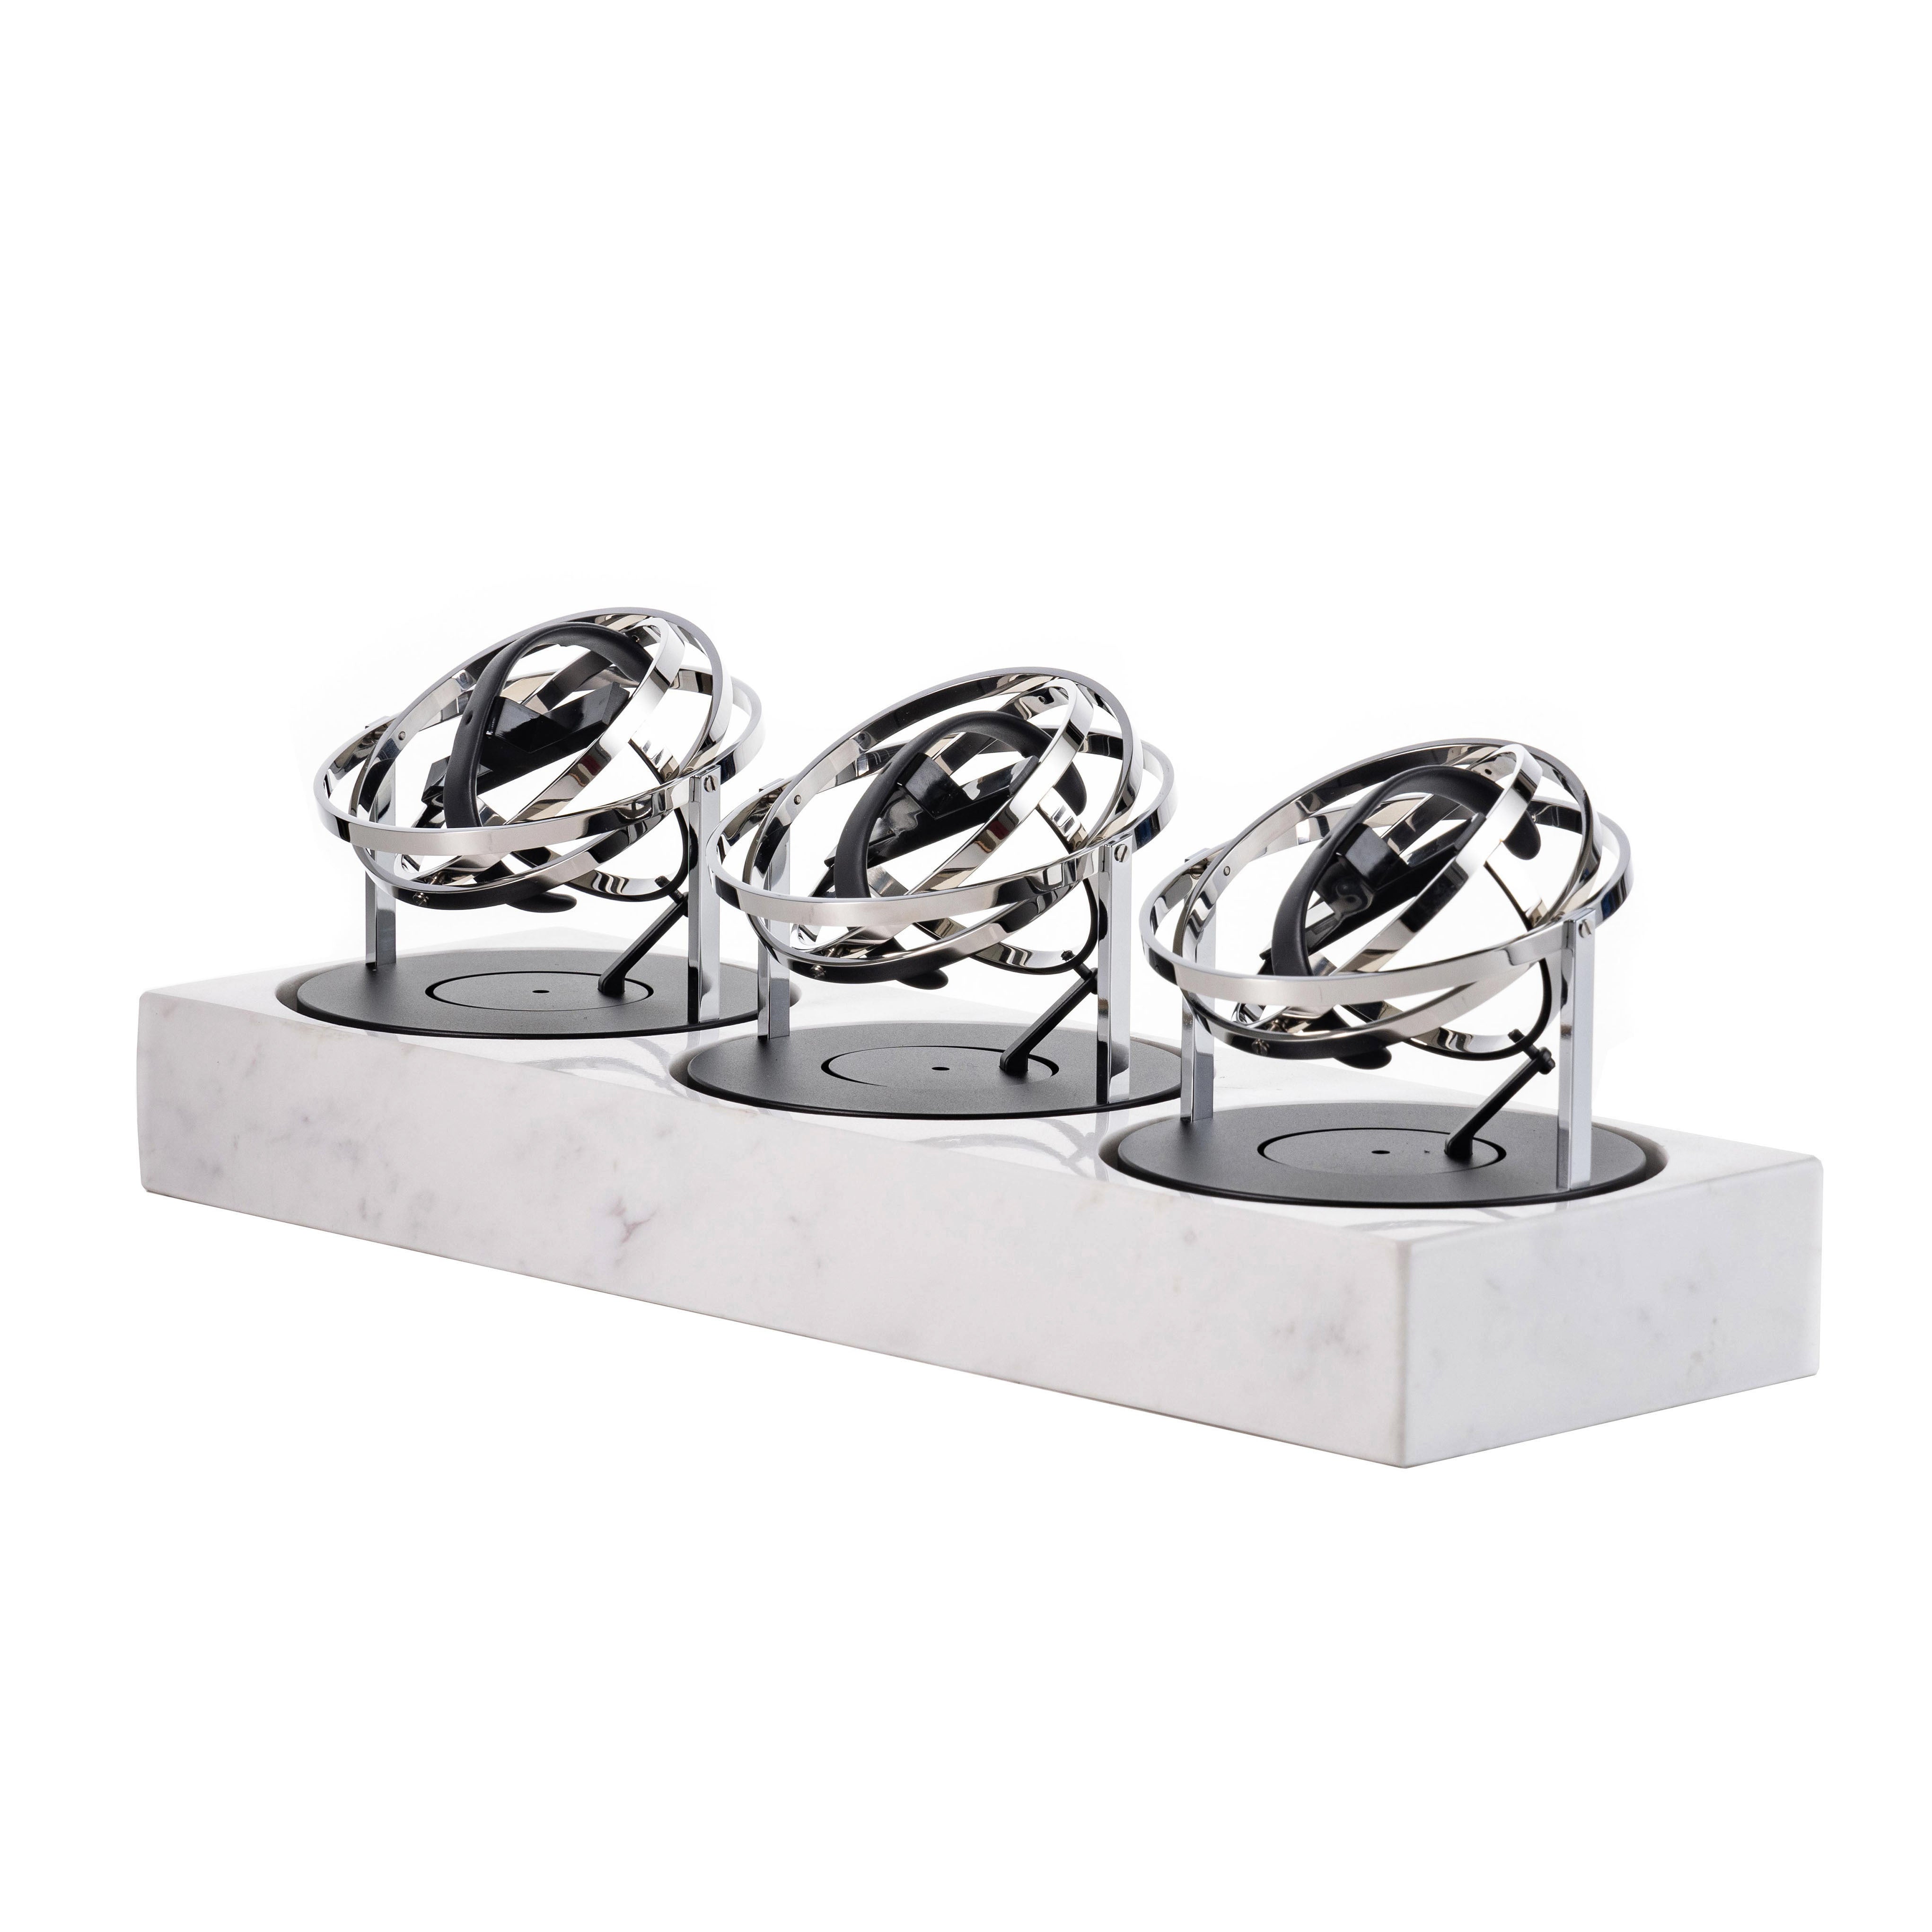 Triple Watch Winder - Astronomia X1 Gold - White Marble Edition